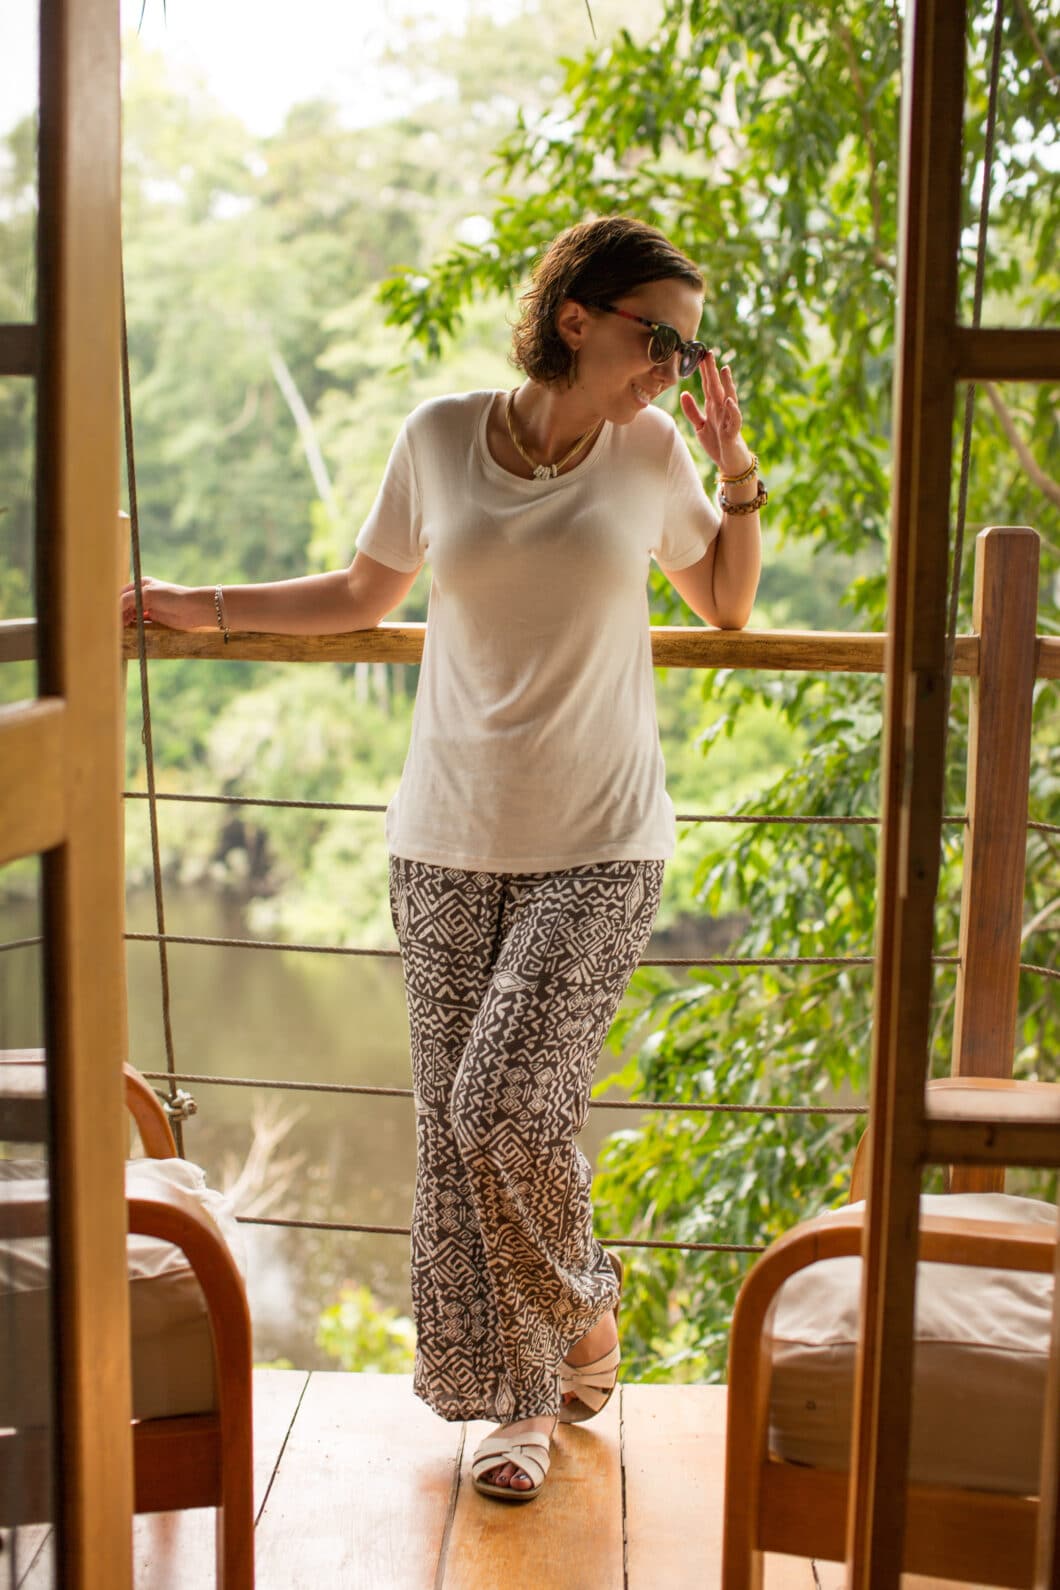 A woman poses in a comfortable, casual black and white outfit, standing on a balcony in front of a tropical landscape of the Amazon rainforest.